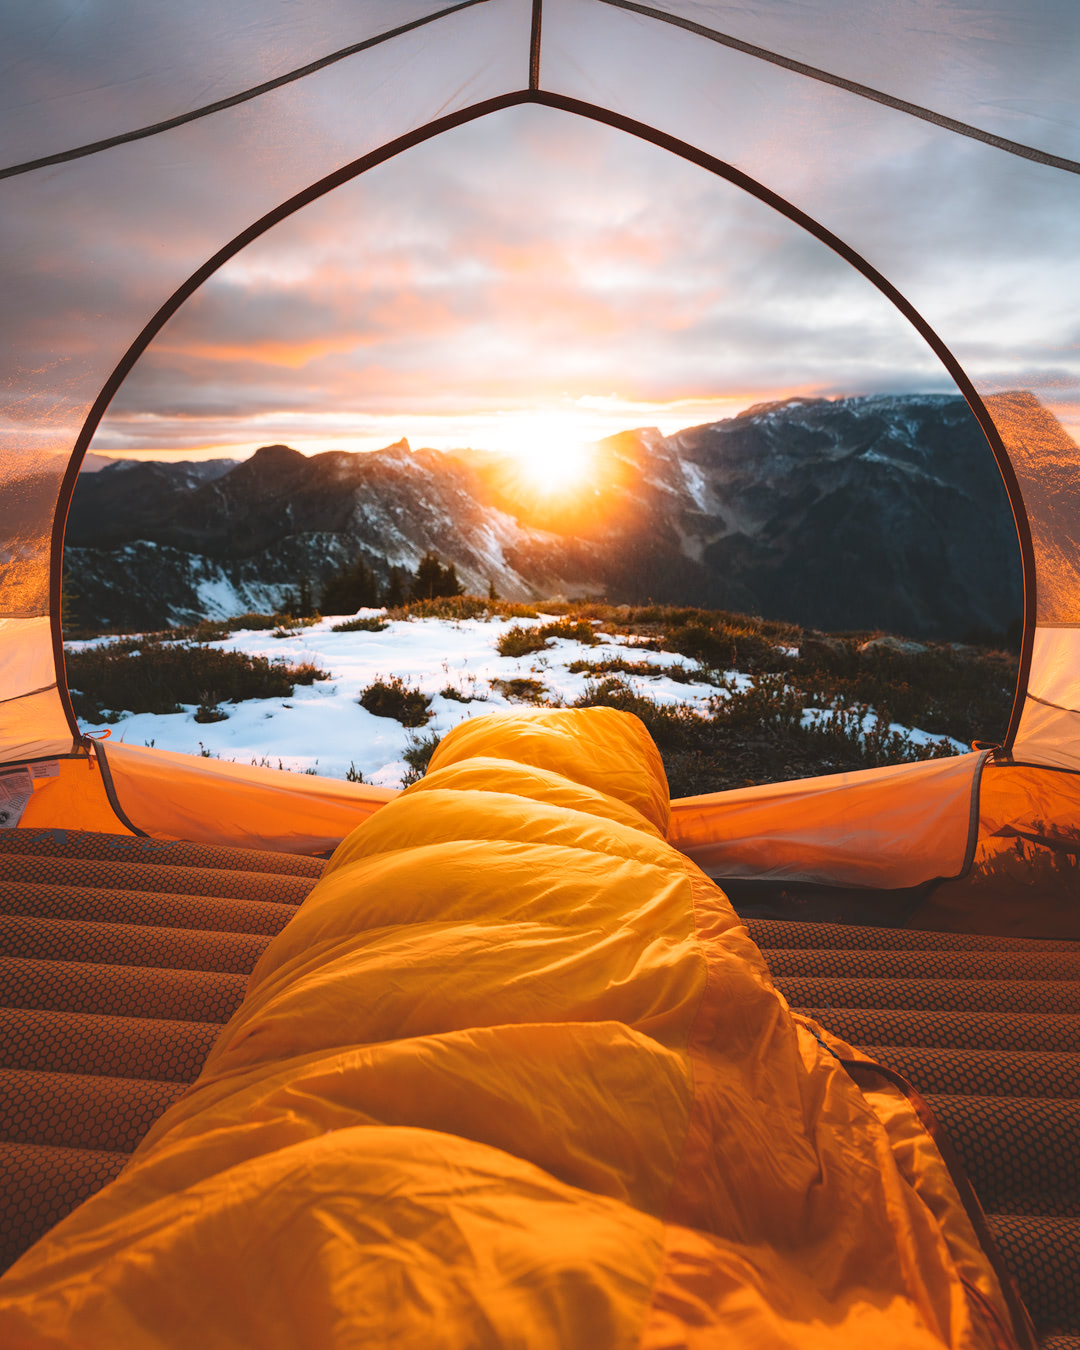 Getting a Good Nights Sleep when Backcountry Camping